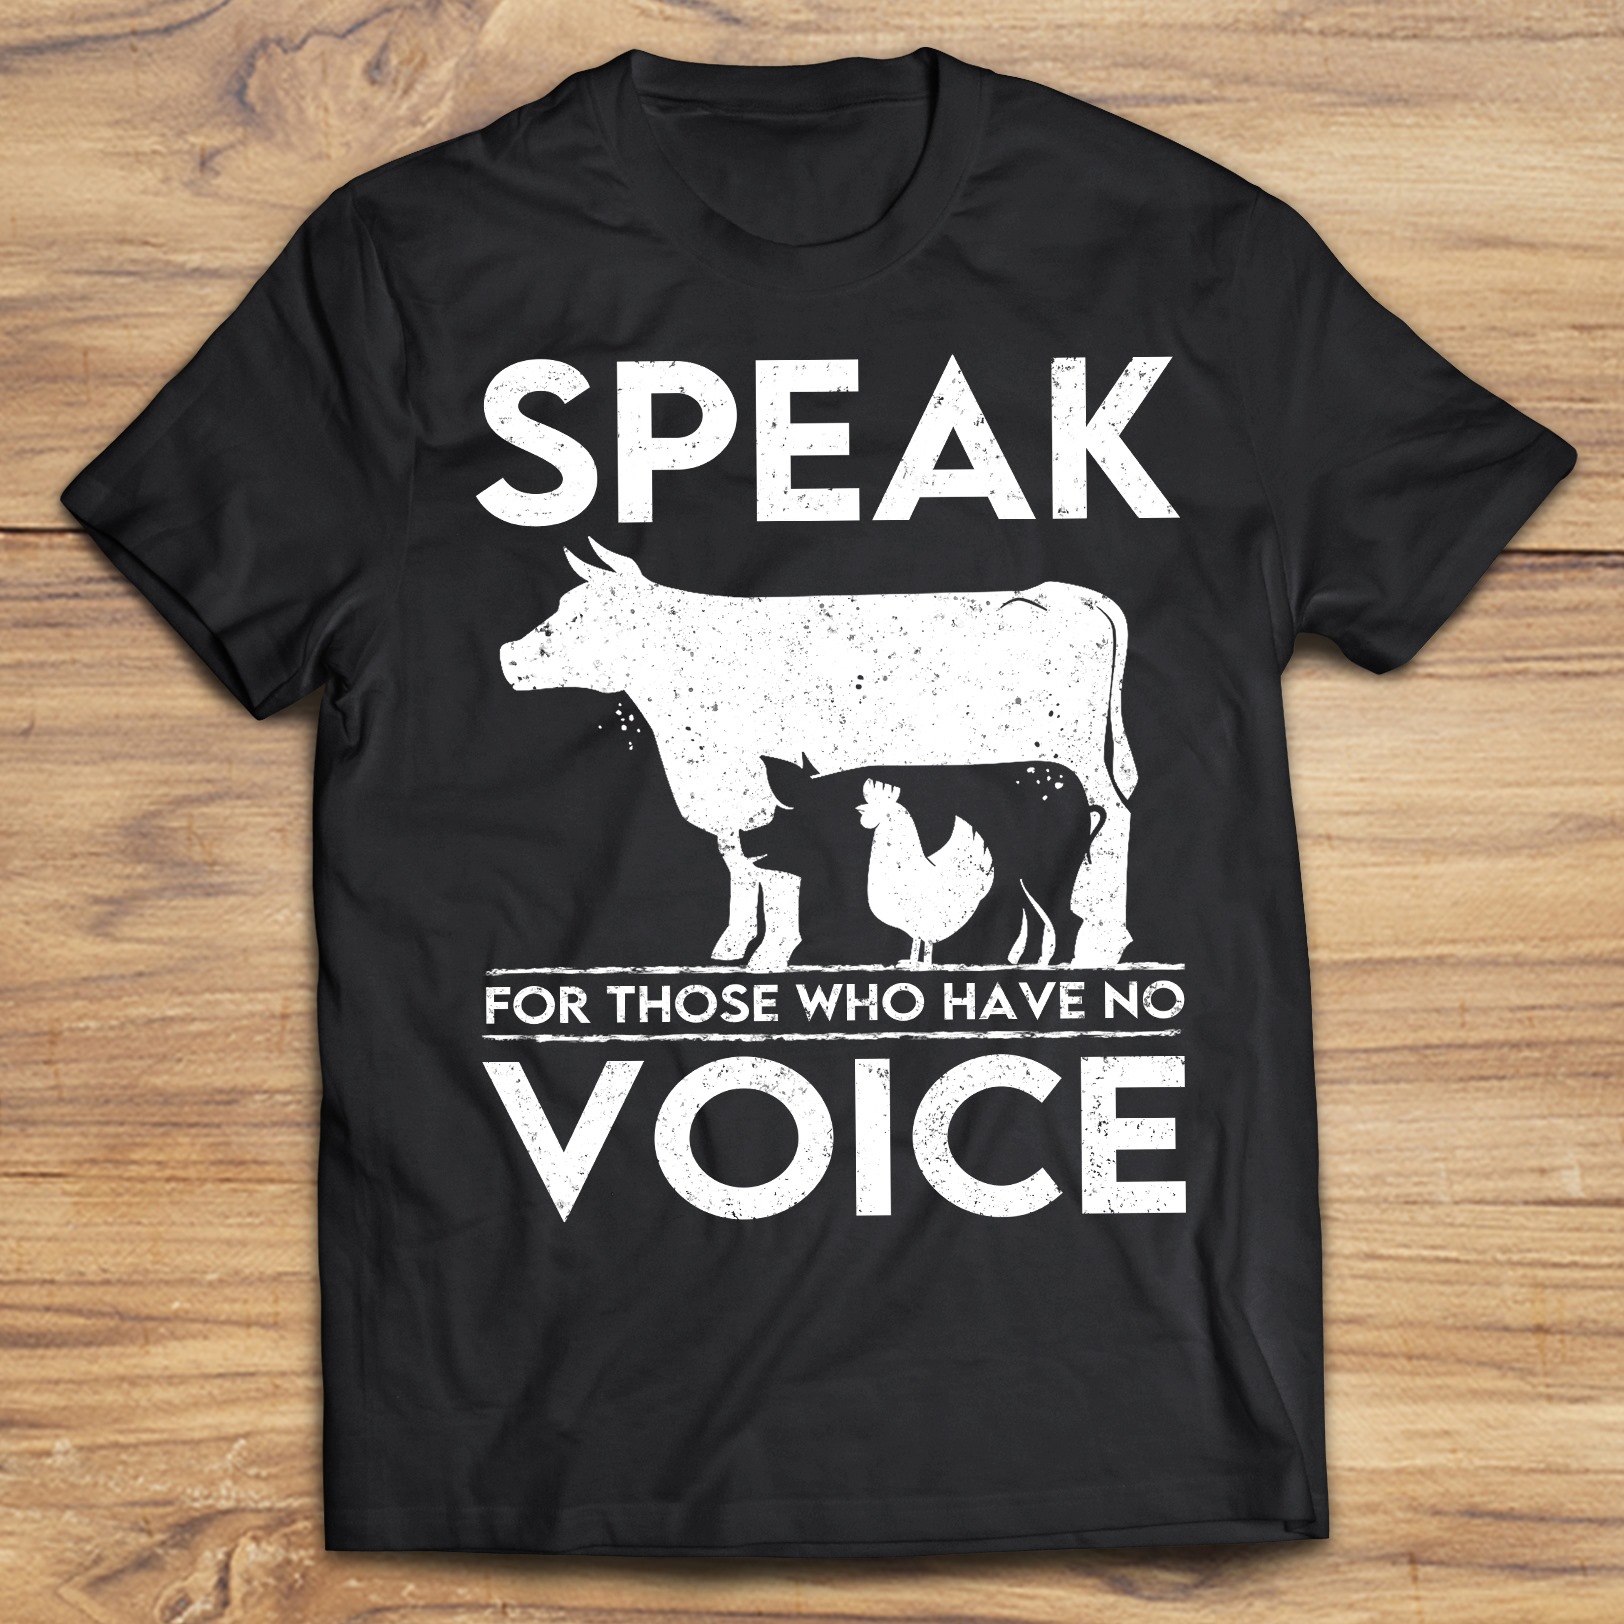 Speak for those who have no voice - Cow, pig and chicken